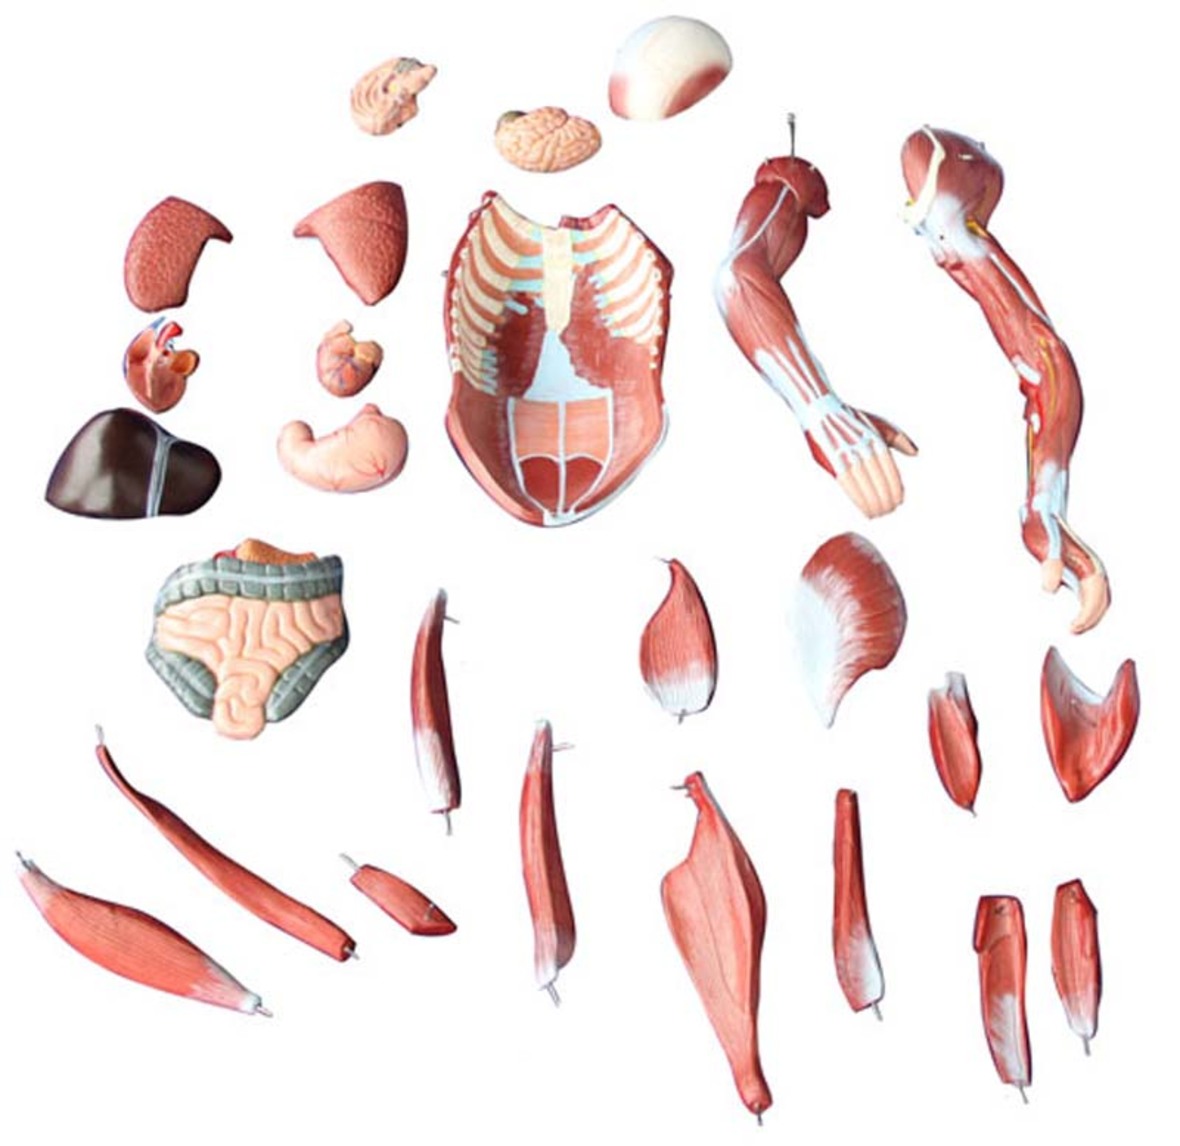 Human Muscle Model Male - 80cm model - 27 parts - why.gr